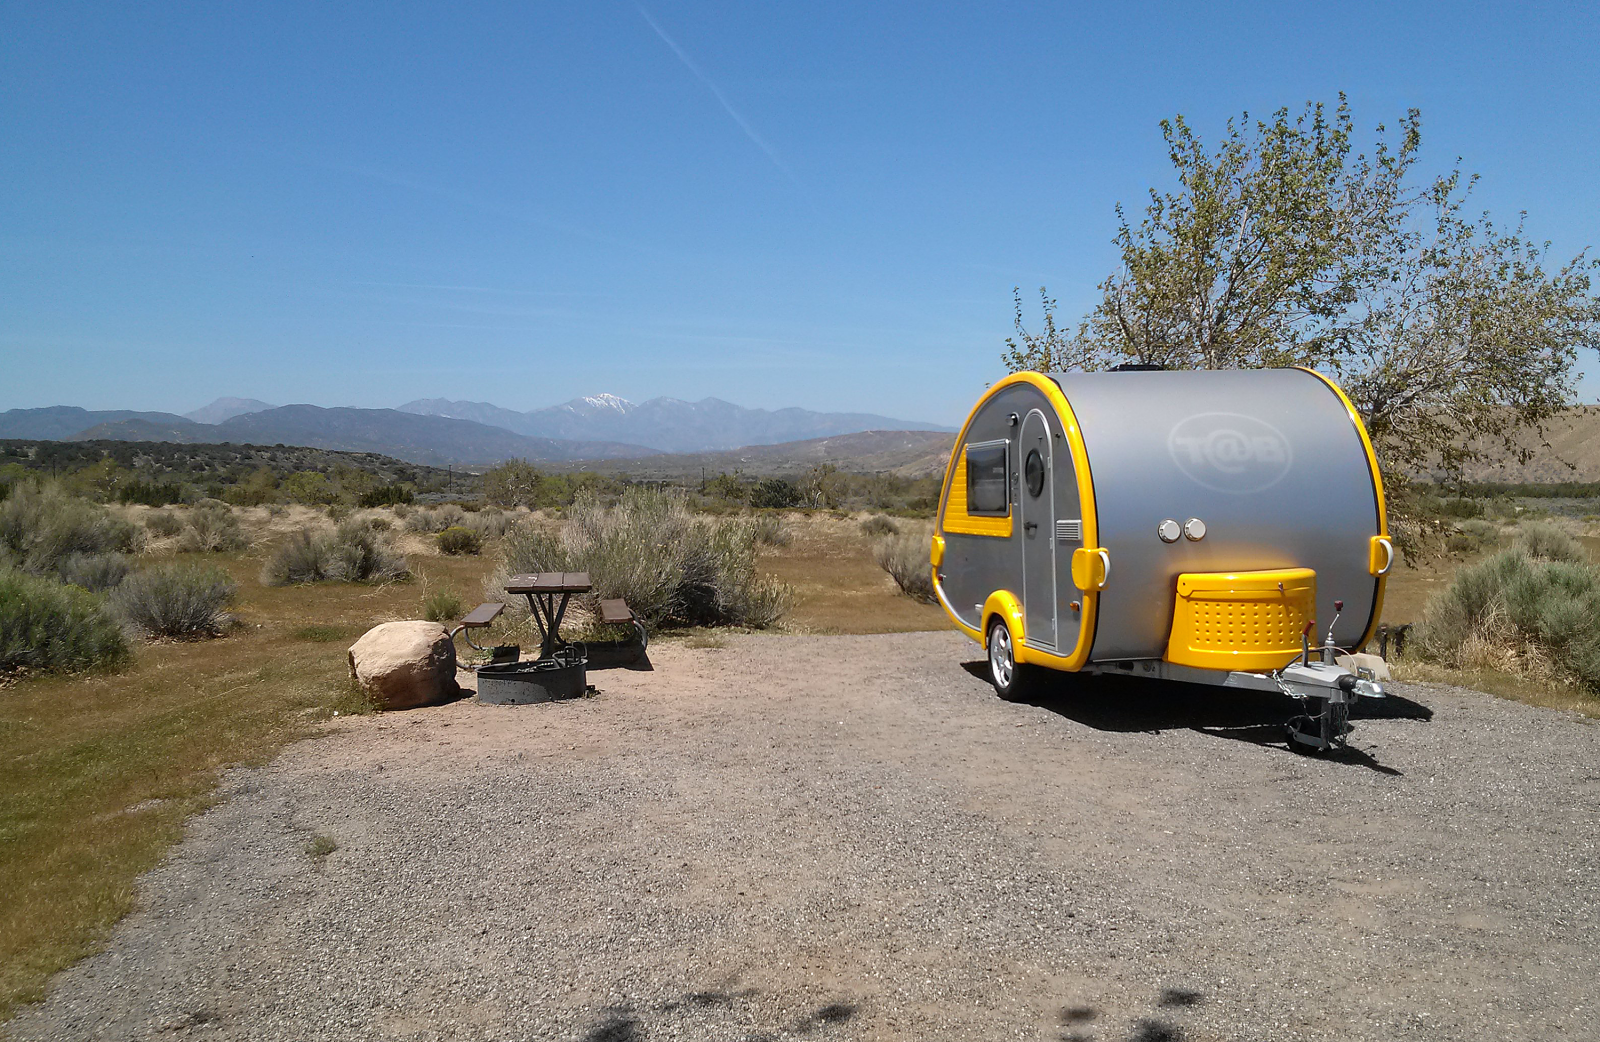 Small Yellow and aluminum retro trailer on a gravel RV slab next to a picnic table on the left in the desert.